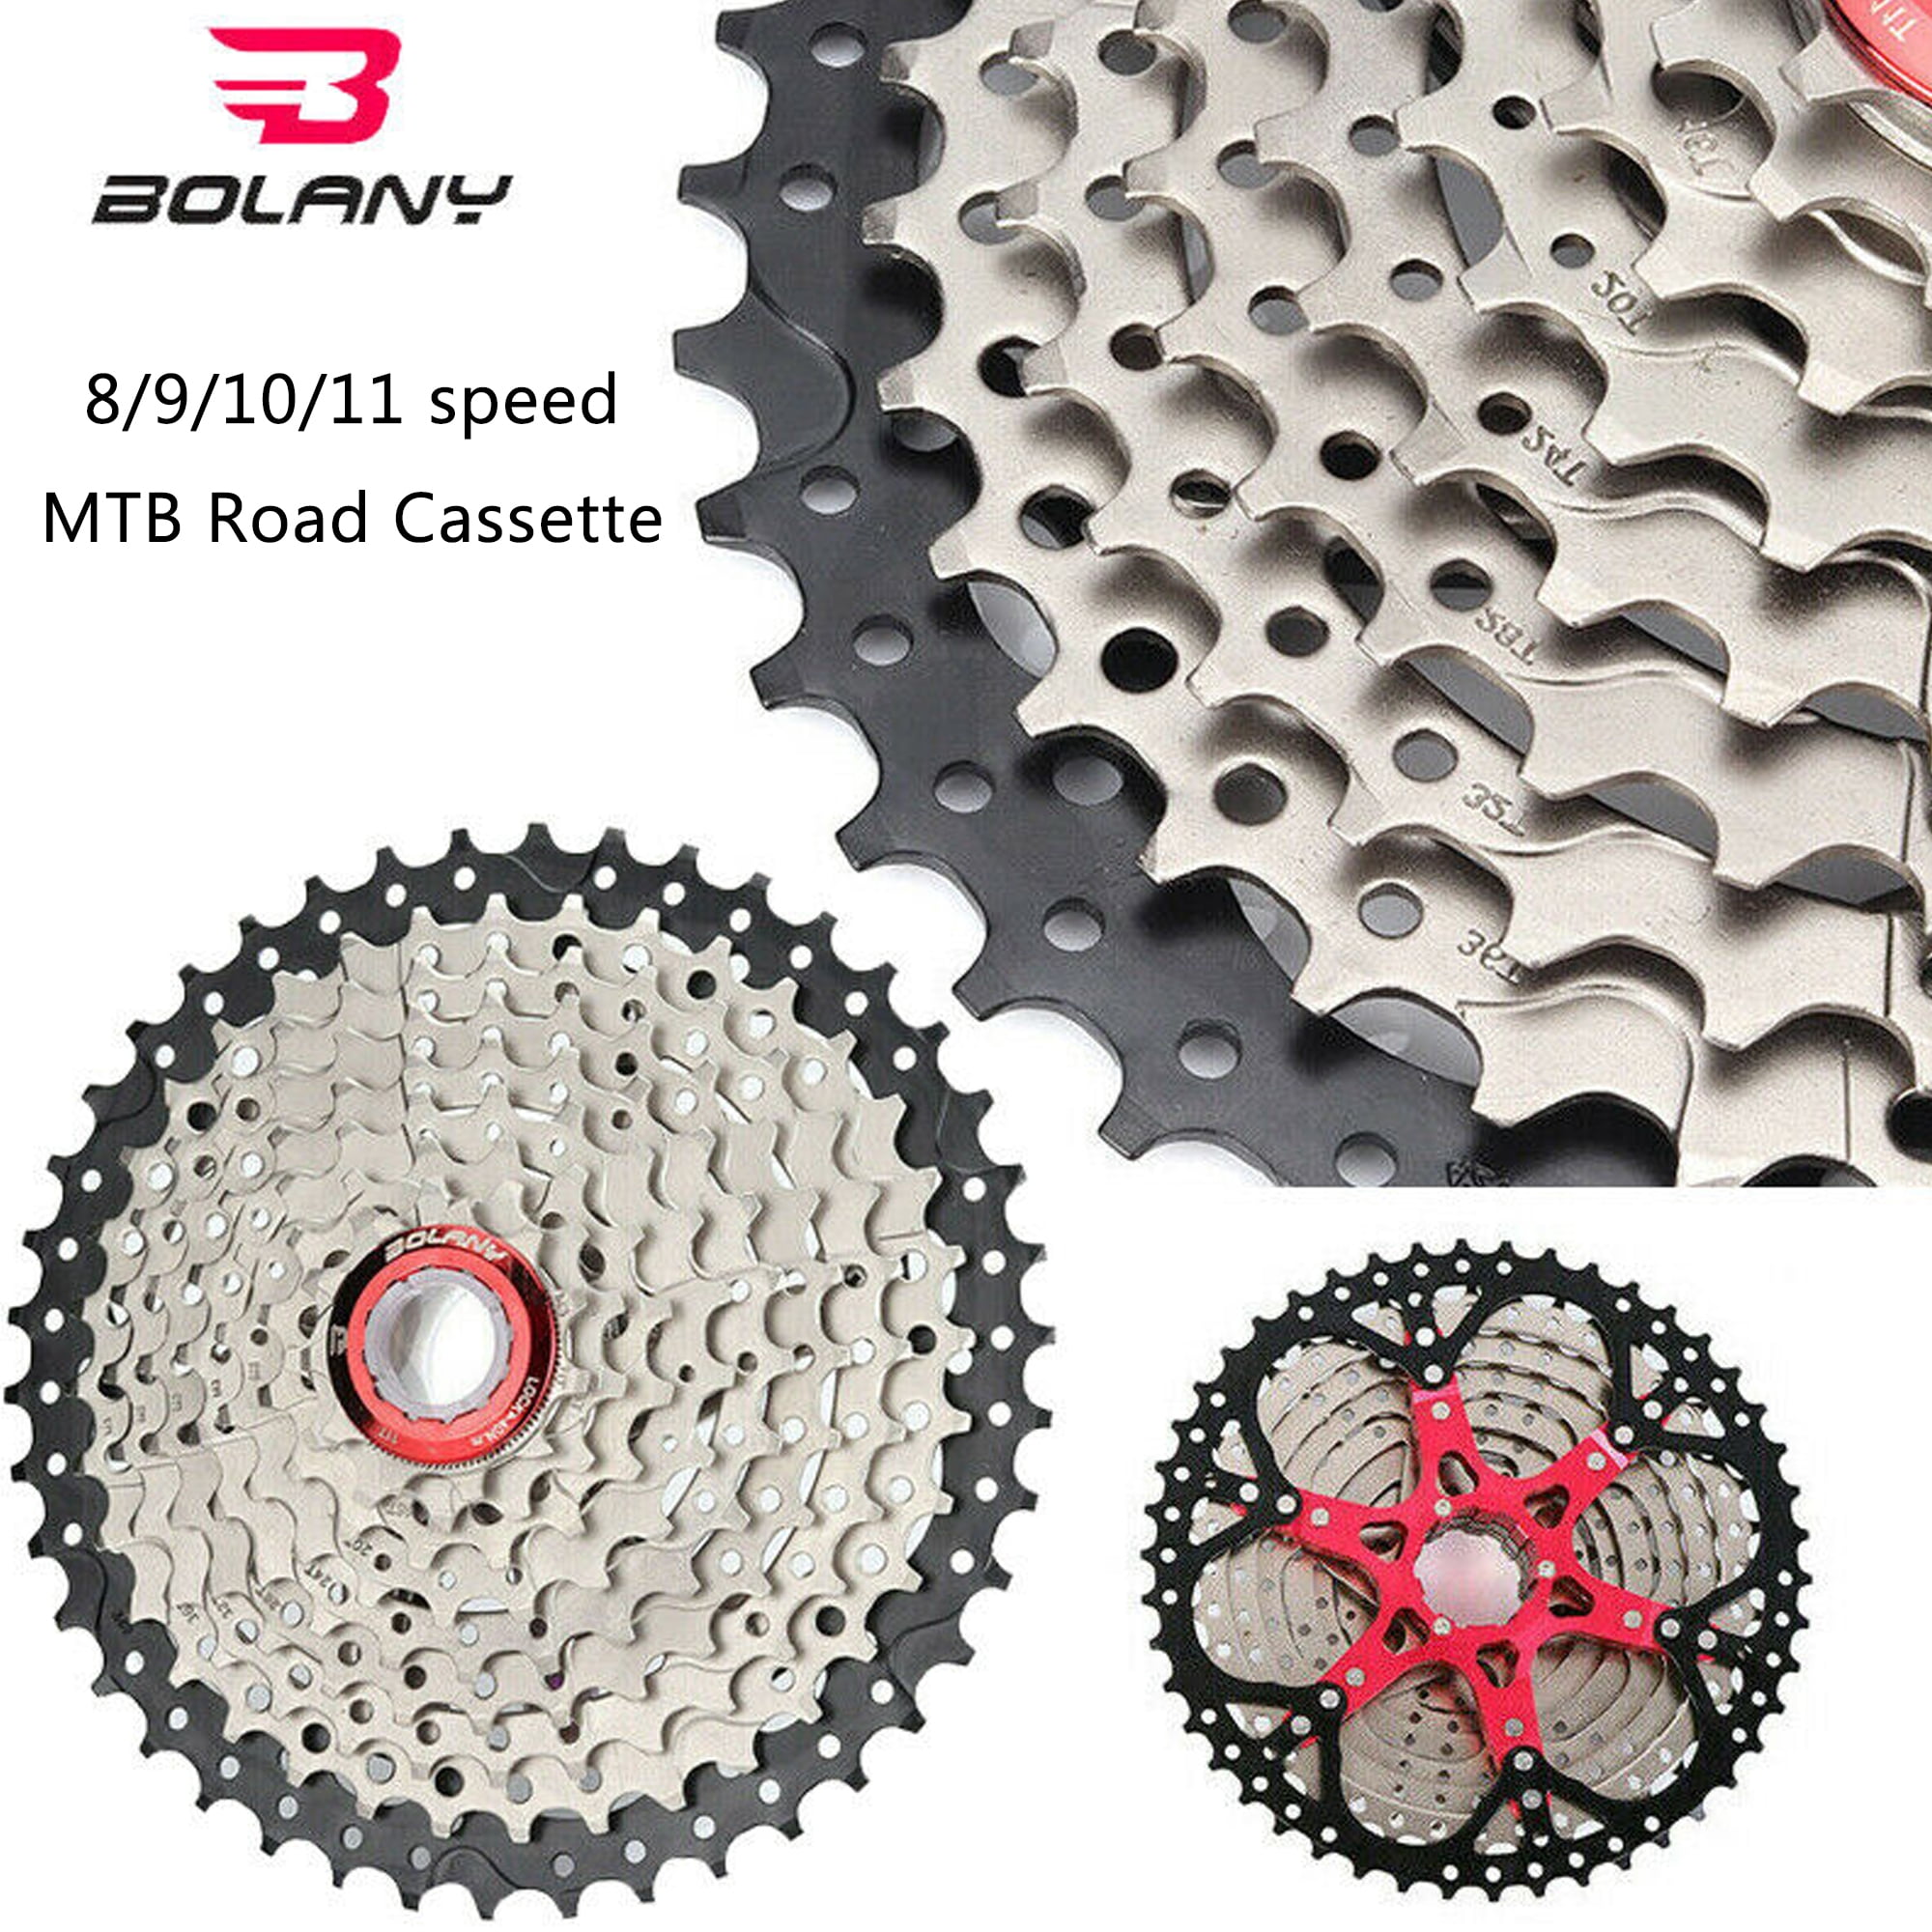 Speed Mountain Road Bike Cassette, fit HG Shimano/SRAM/FSA/ Campagnolo/KMC XC AM DH MTB 6/7/8/9/10/11S 11-25/28/32/36/40/42/46/50T Cogs Bicycle - Walmart.com